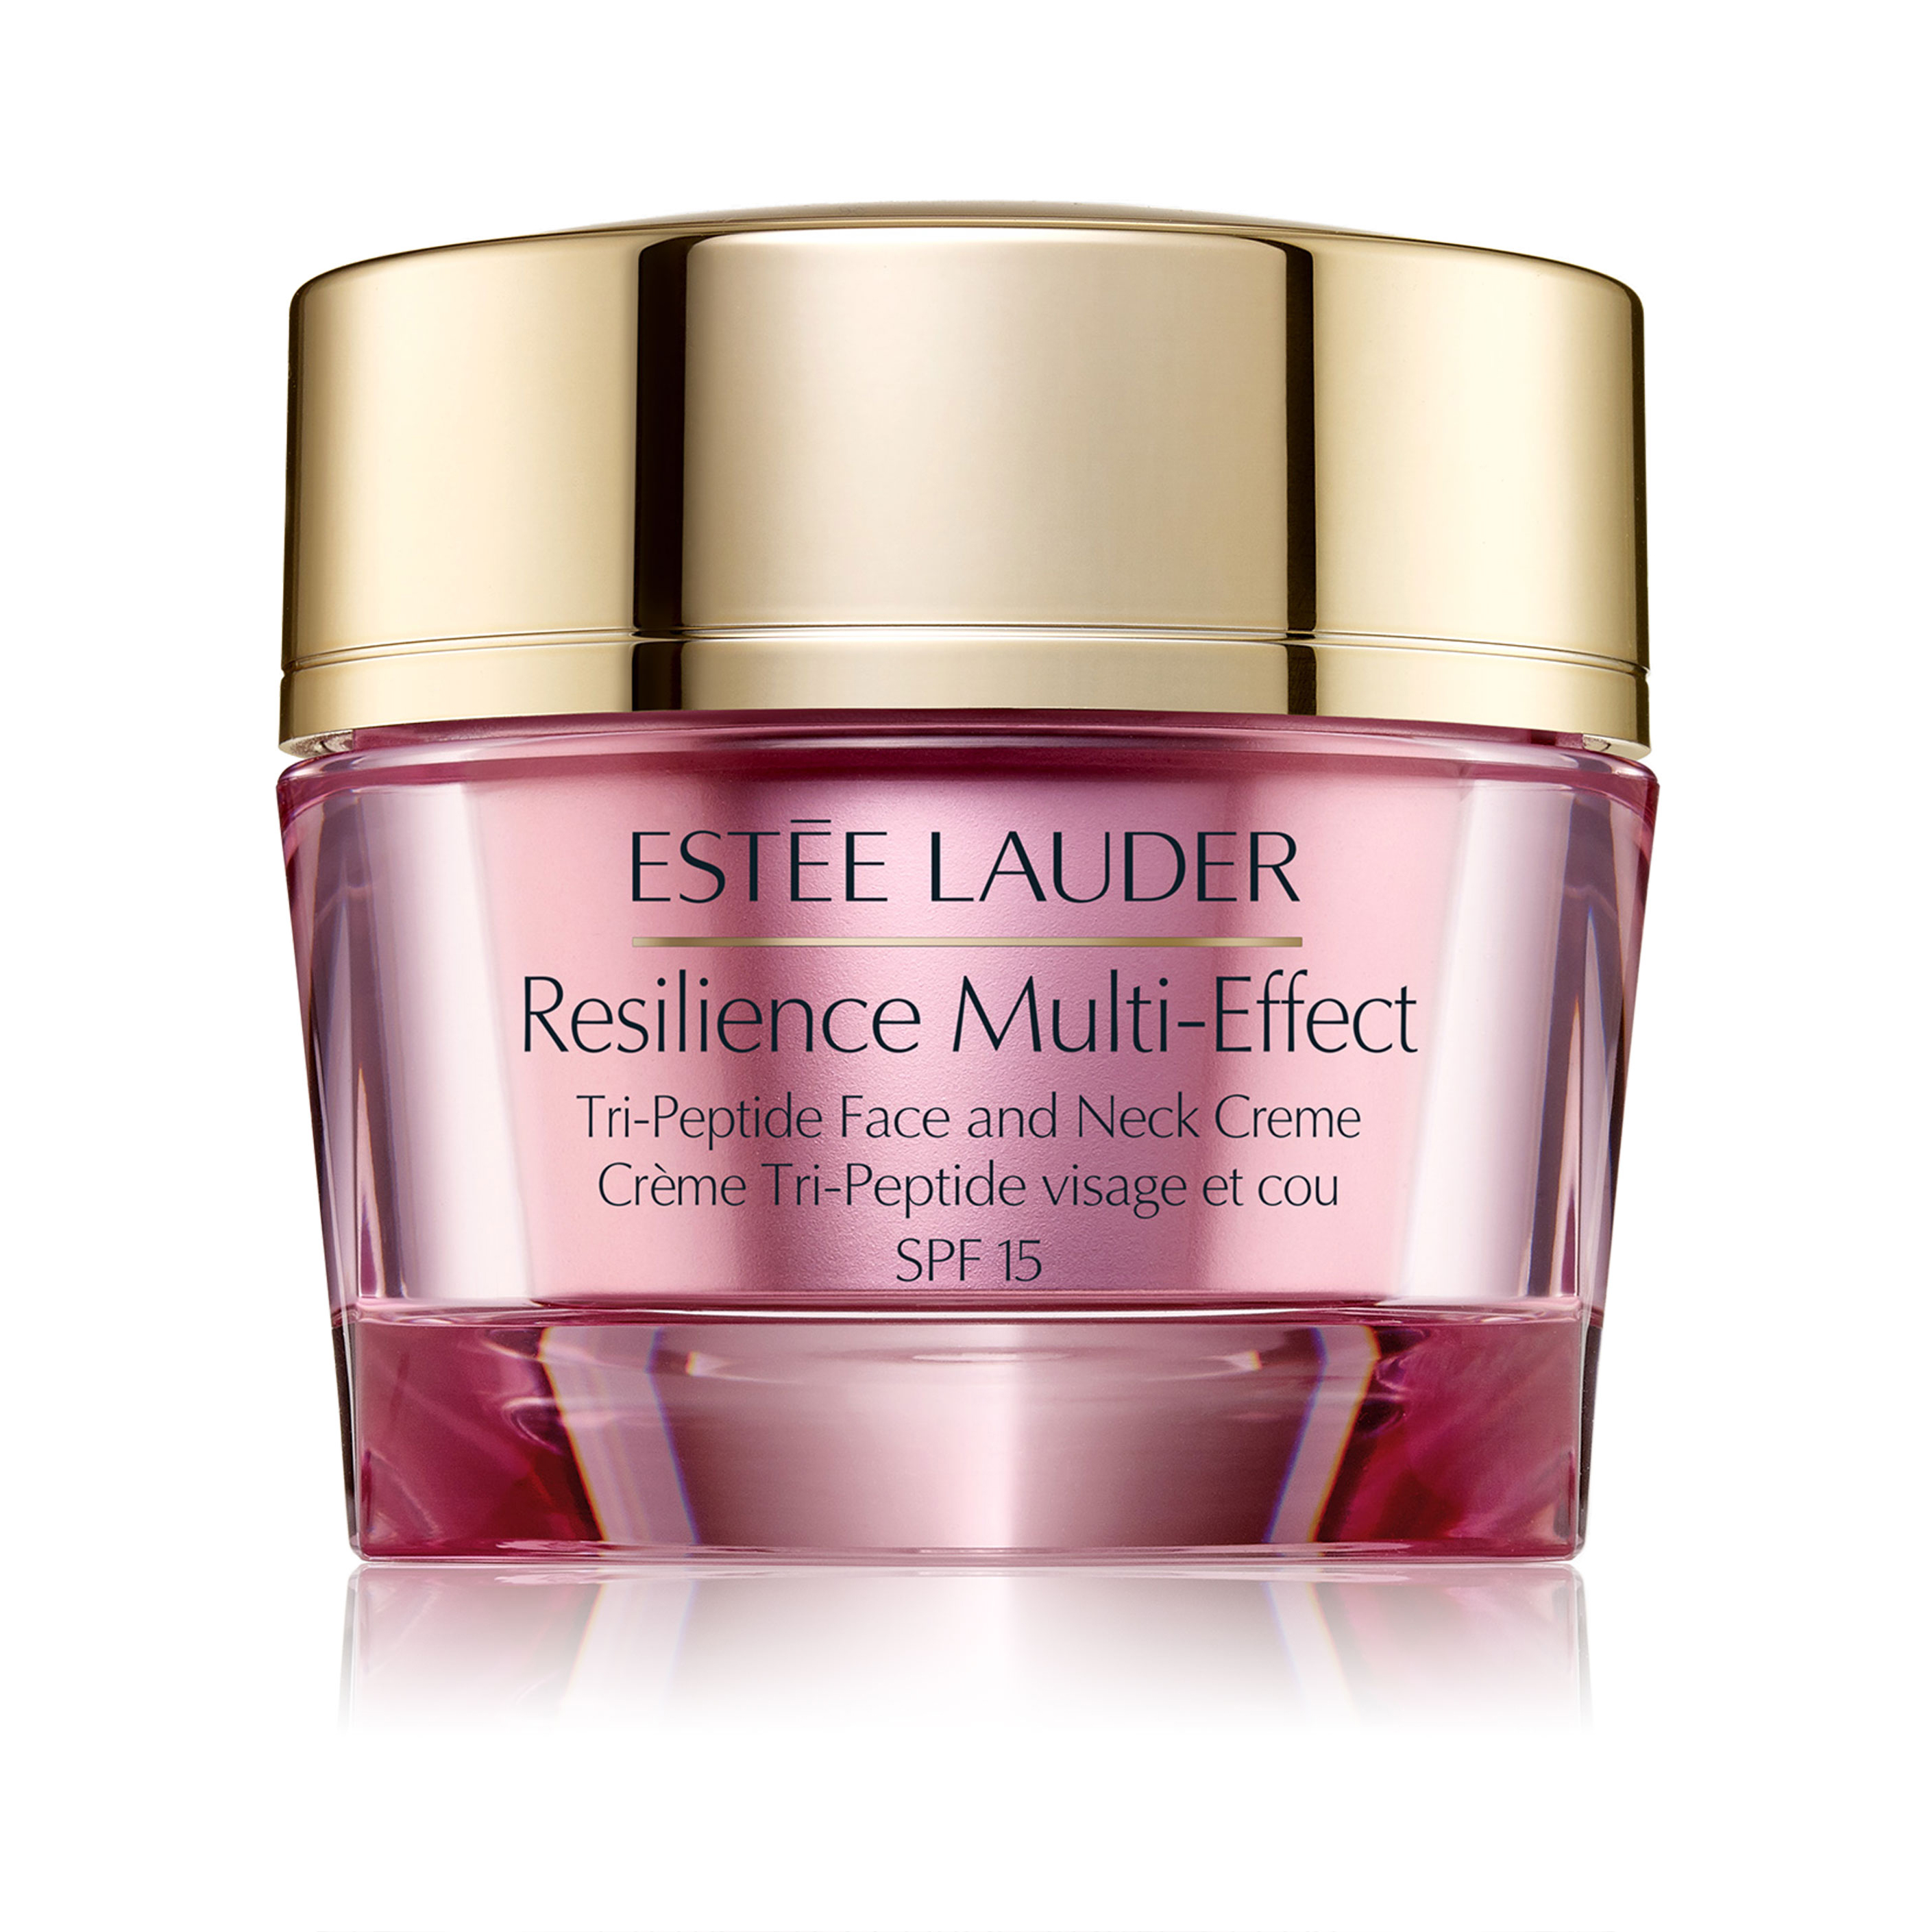 Estee Lauder Resilience Multi Effect Tri Peptide Face and Neck Creme SPF 15 50ml - NORMAL/COMBINATION